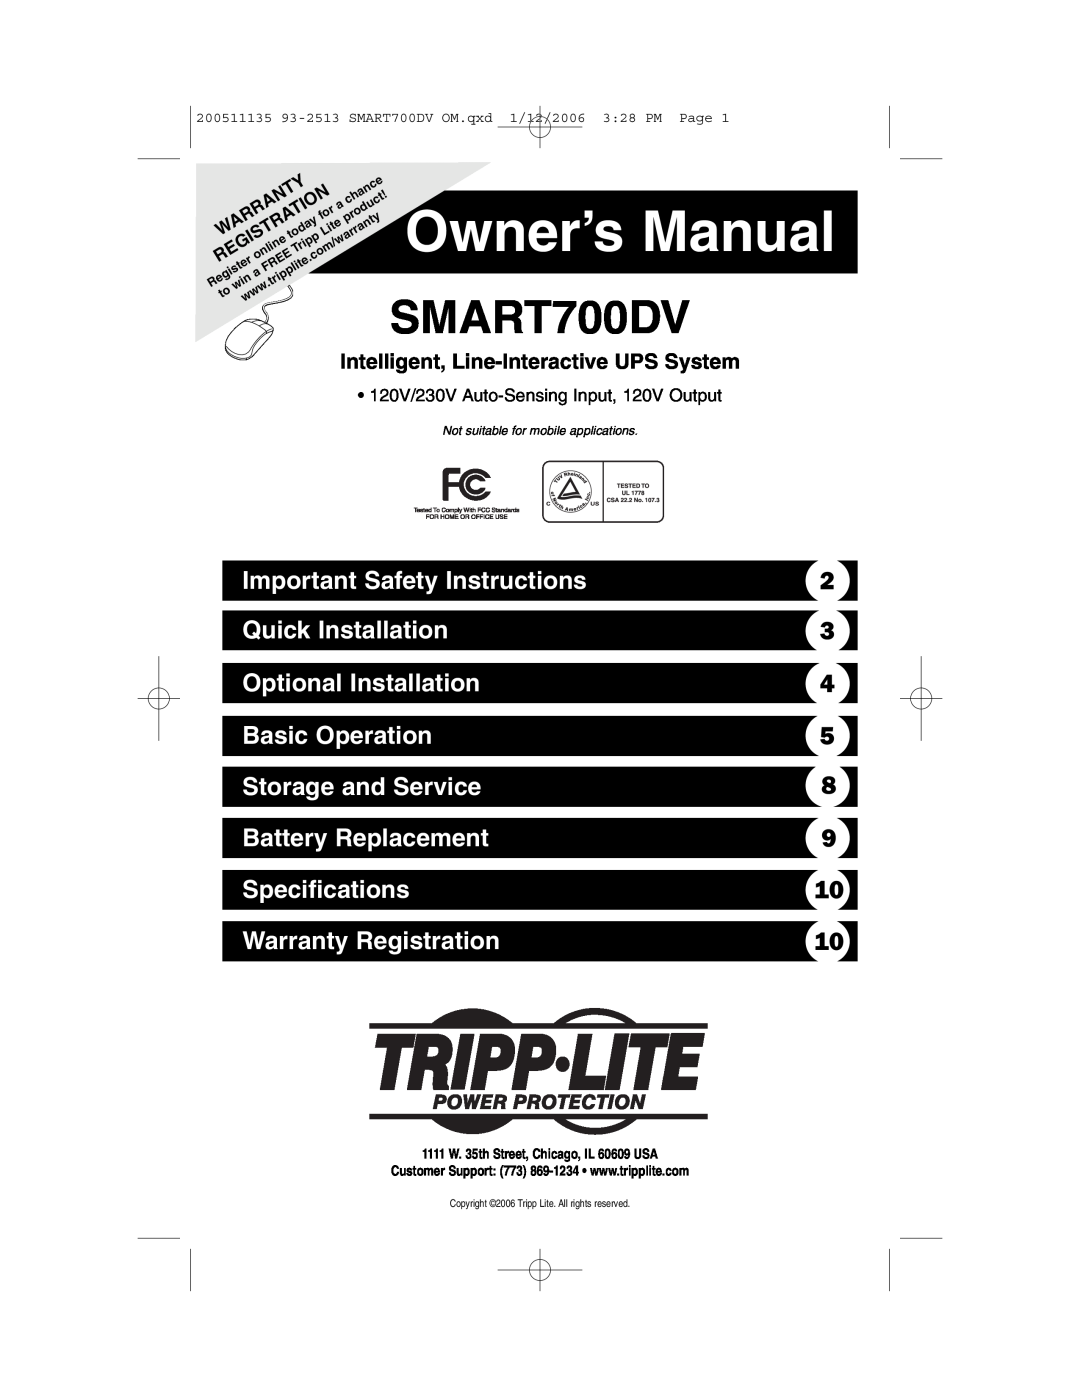 Tripp Lite 700DV owner manual Important Safety Instructions, Quick Installation, Optional Installation, Basic Operation 